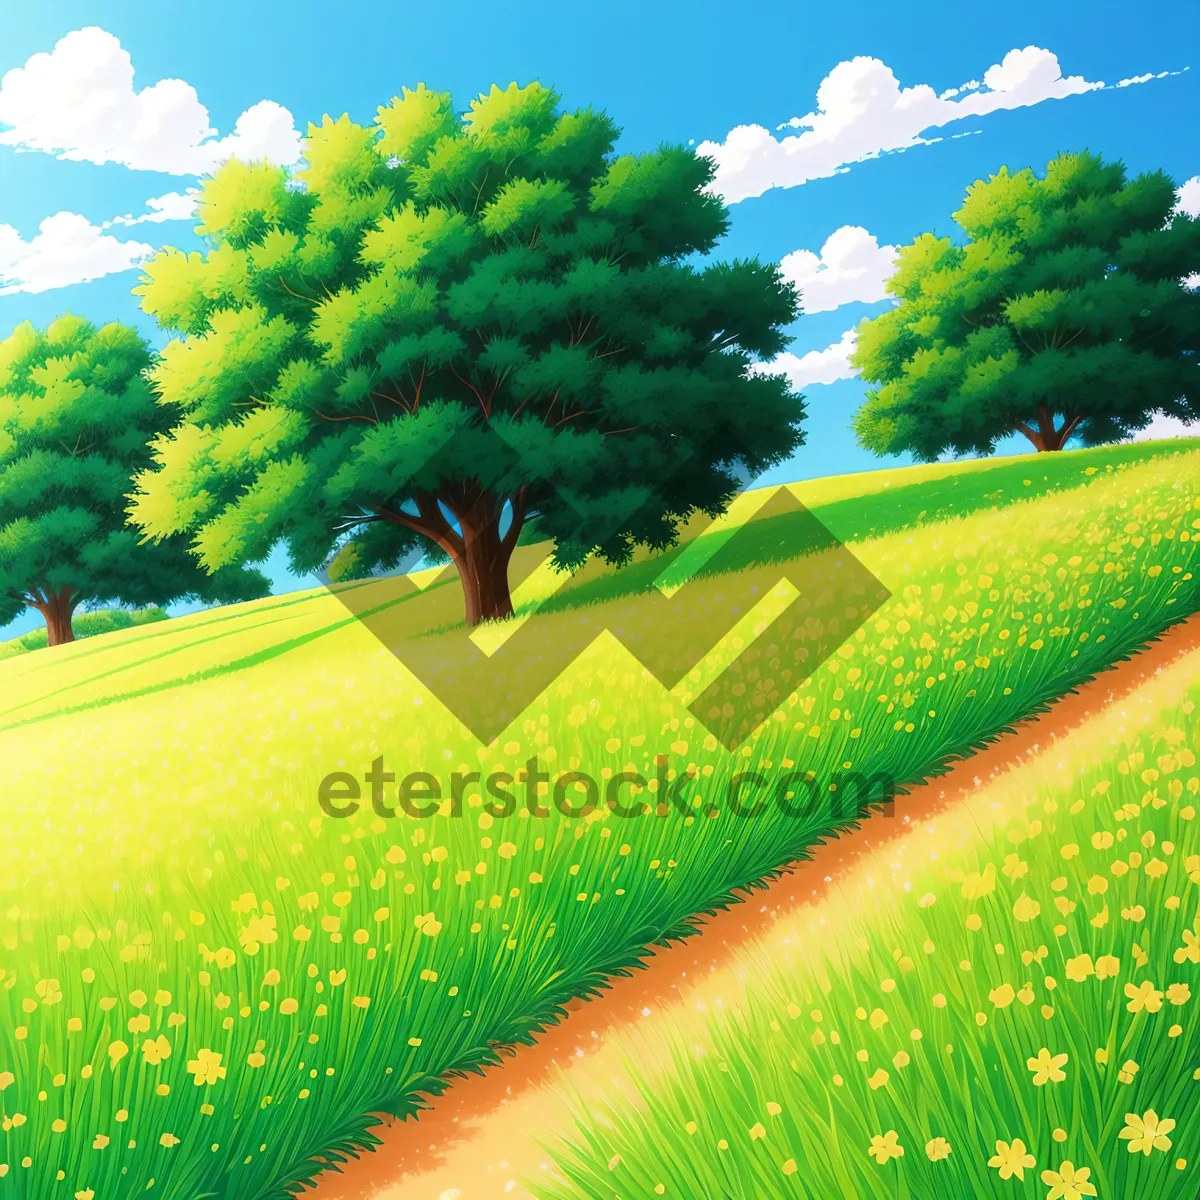 Picture of Idyllic Summer Landscape with Rapeseed Field"
(Note: Placeholder text as requested for the image's short name description.)